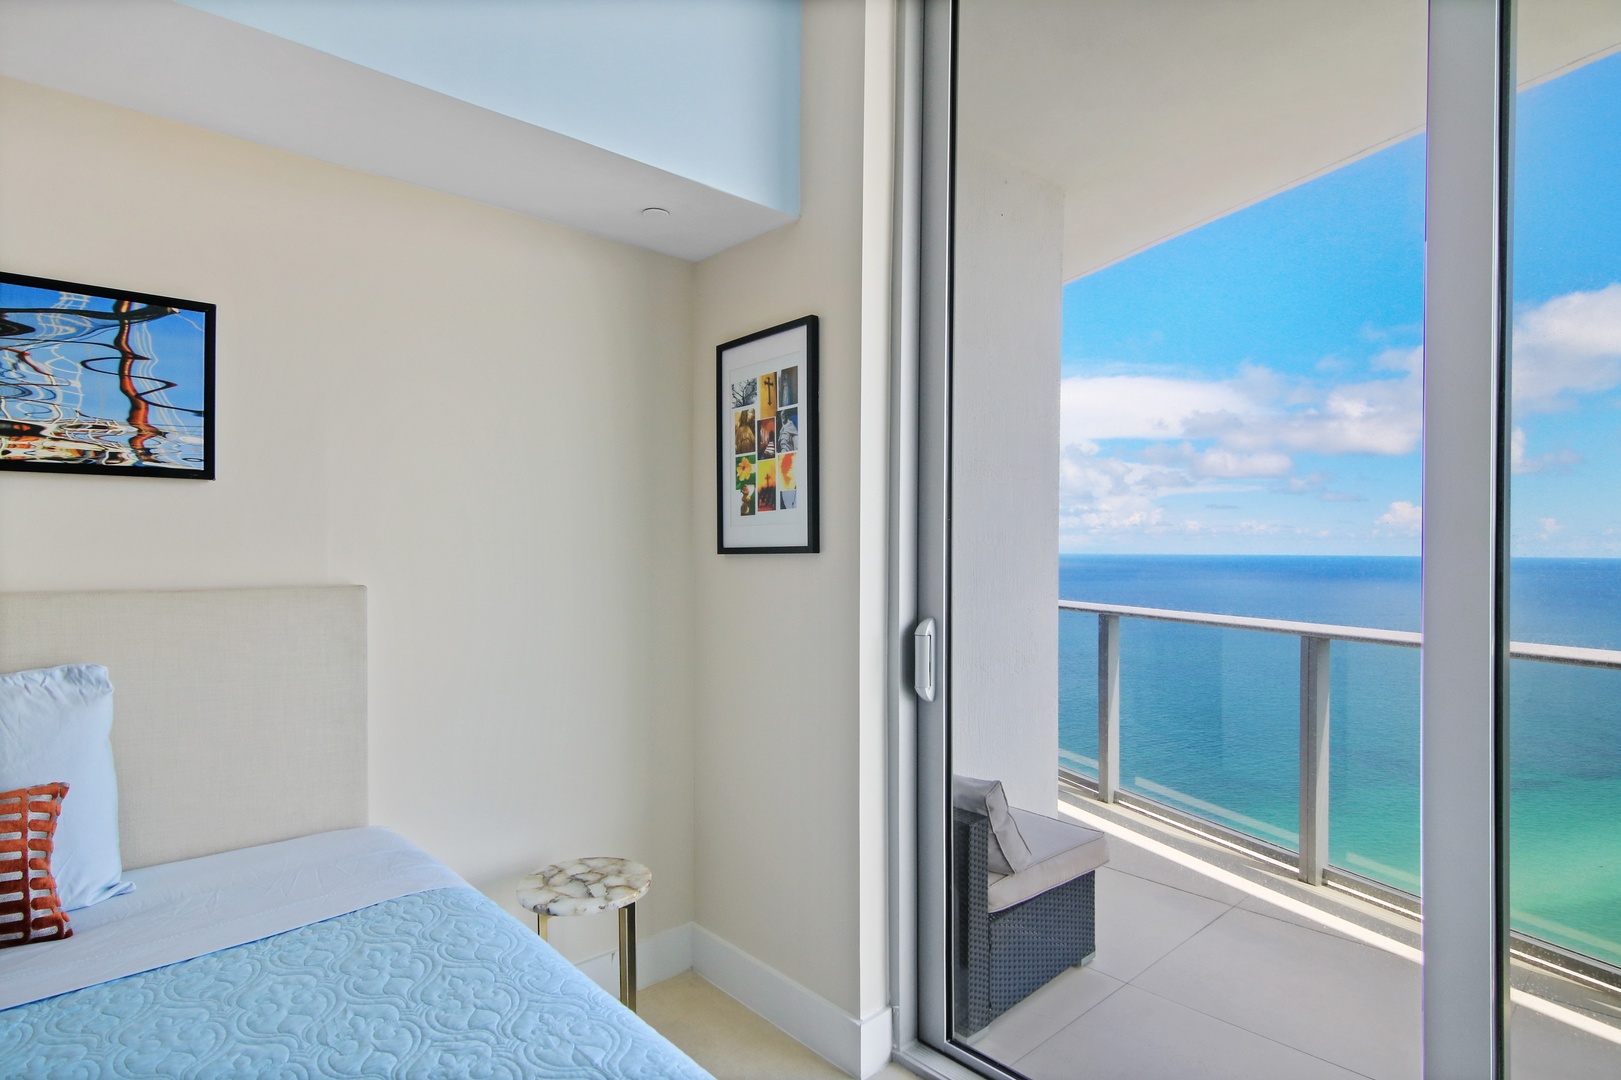 The 2nd of 2 double queen bedrooms offers a Smart TV, desk, & balcony access